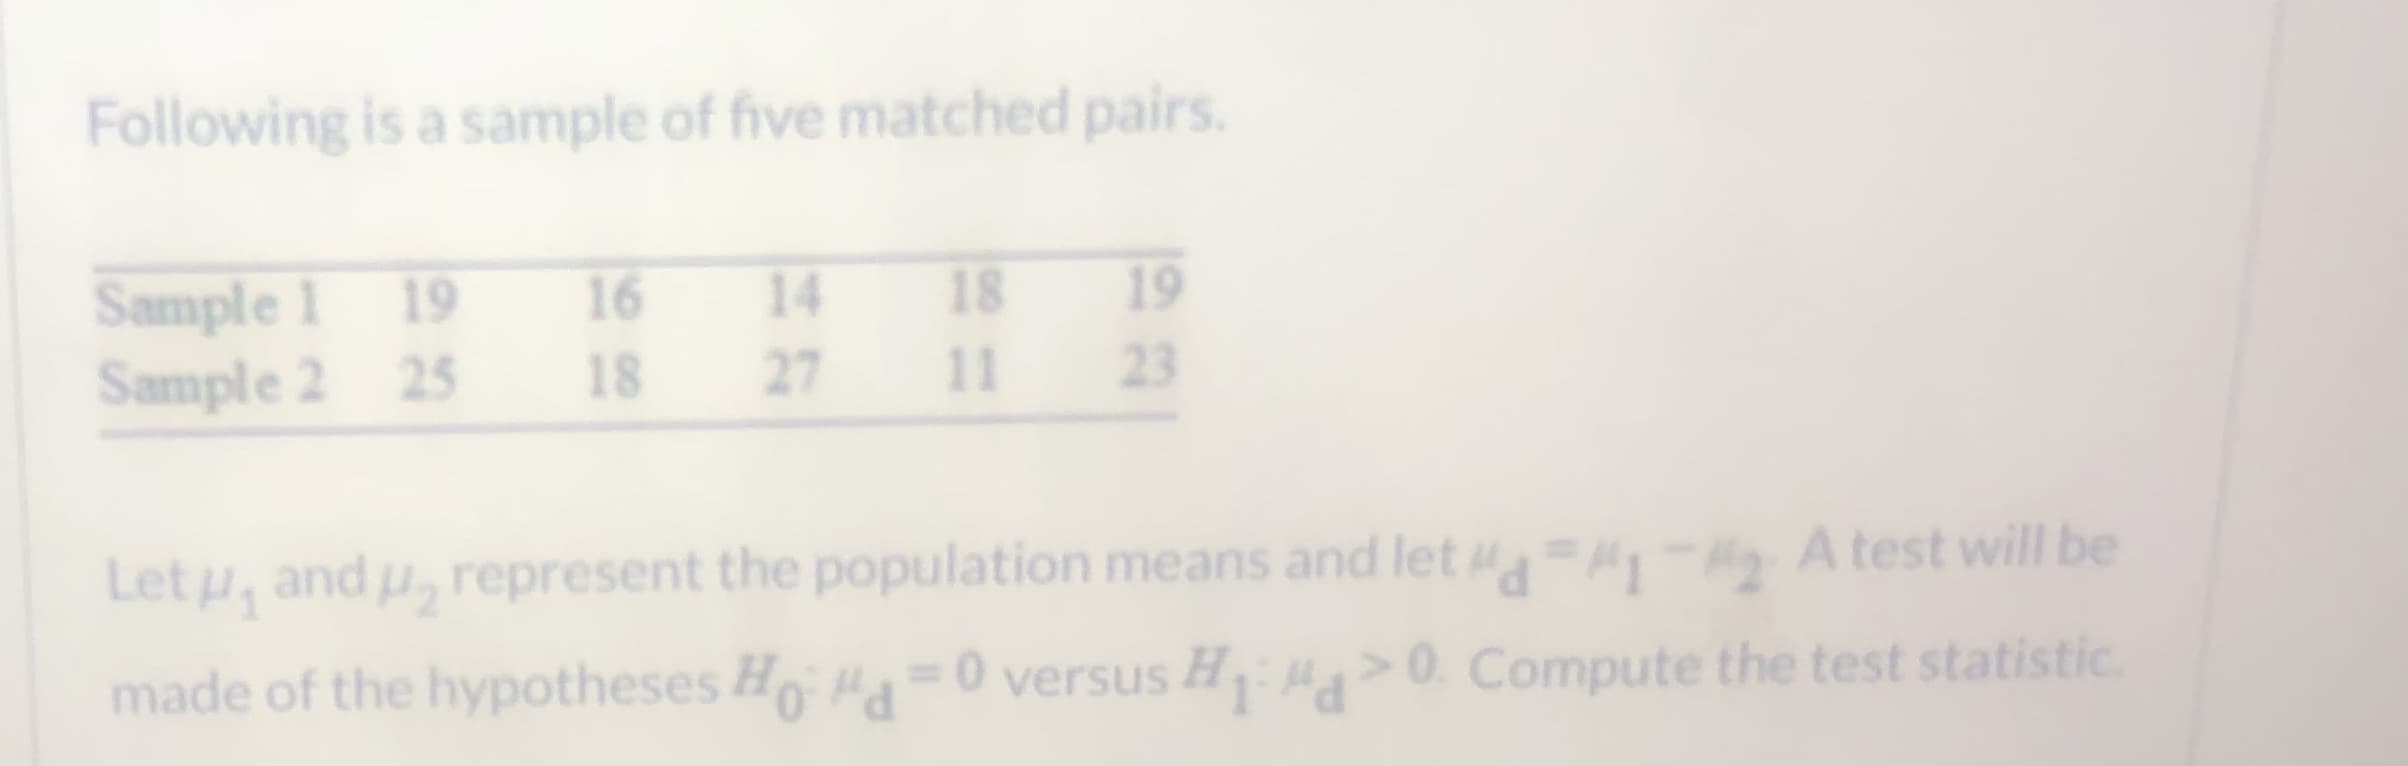 Following is a sample of five matched pairs.
19
Sample 1 19
Sample 2 25
16
14
18
18
27
11
23
Let u, and u, represent the population means and let - A test will be
made of the hypotheses Ho= 0 versus H >0. Compute the test statistic.
